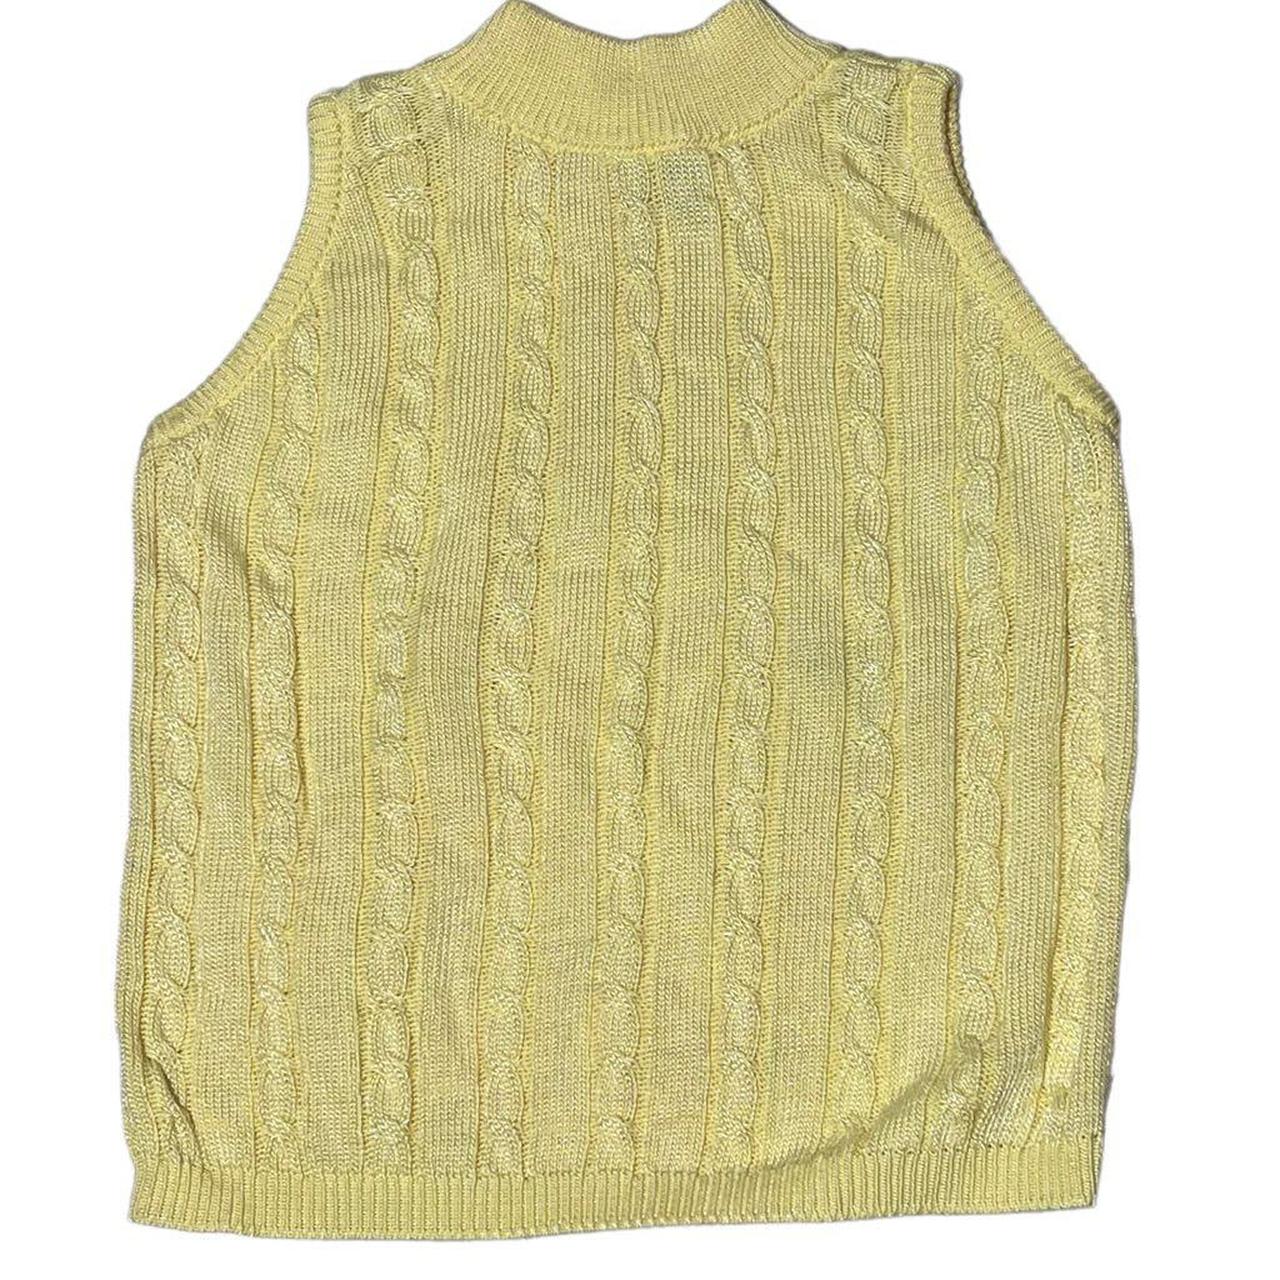 Impeccable vintage yellow sweater vest from Benetton... - Depop